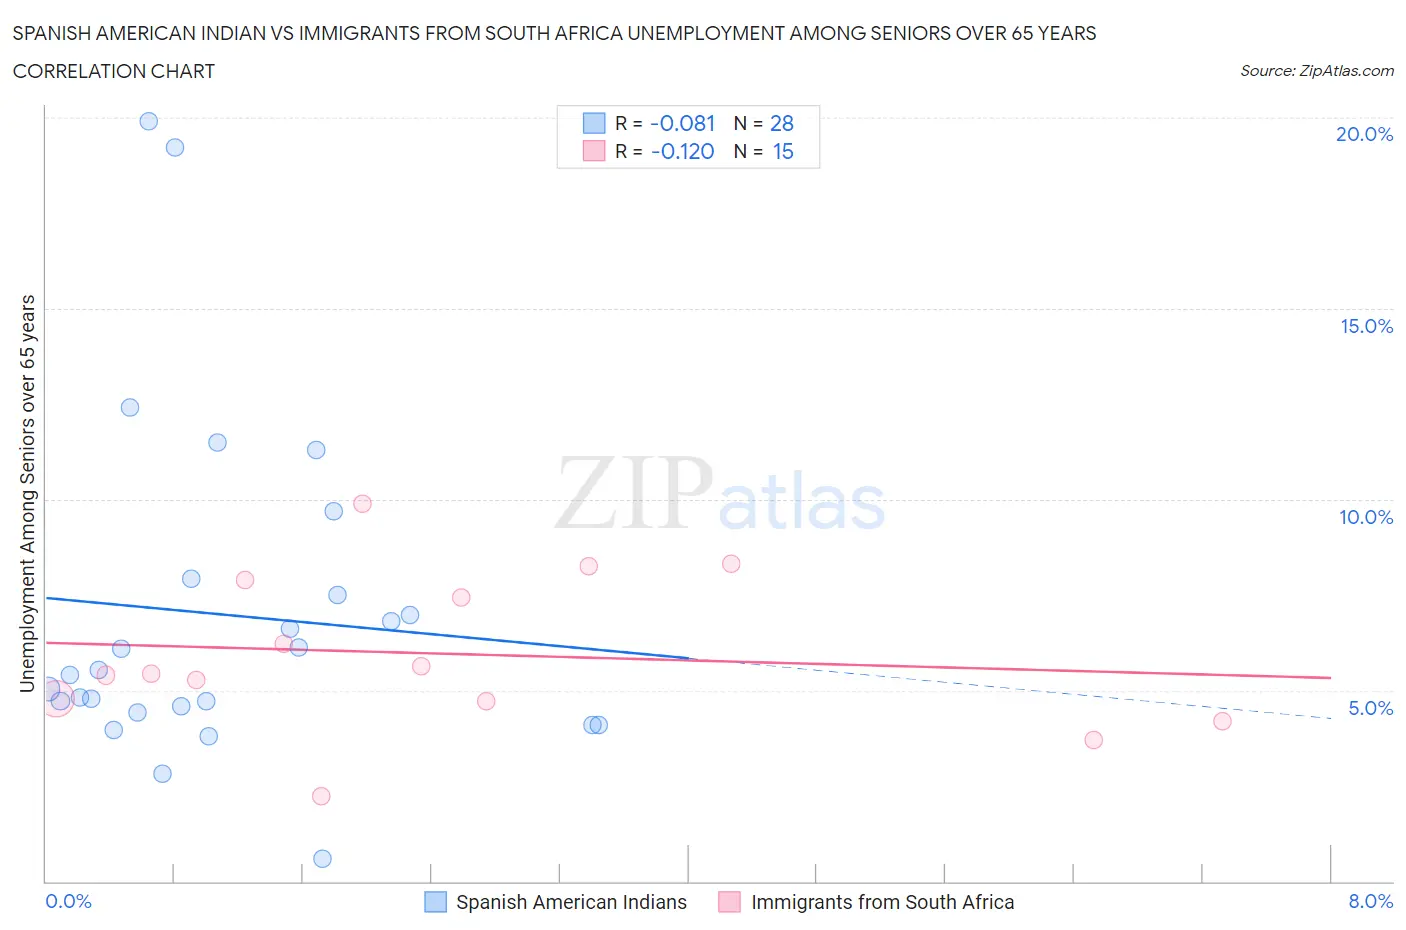 Spanish American Indian vs Immigrants from South Africa Unemployment Among Seniors over 65 years